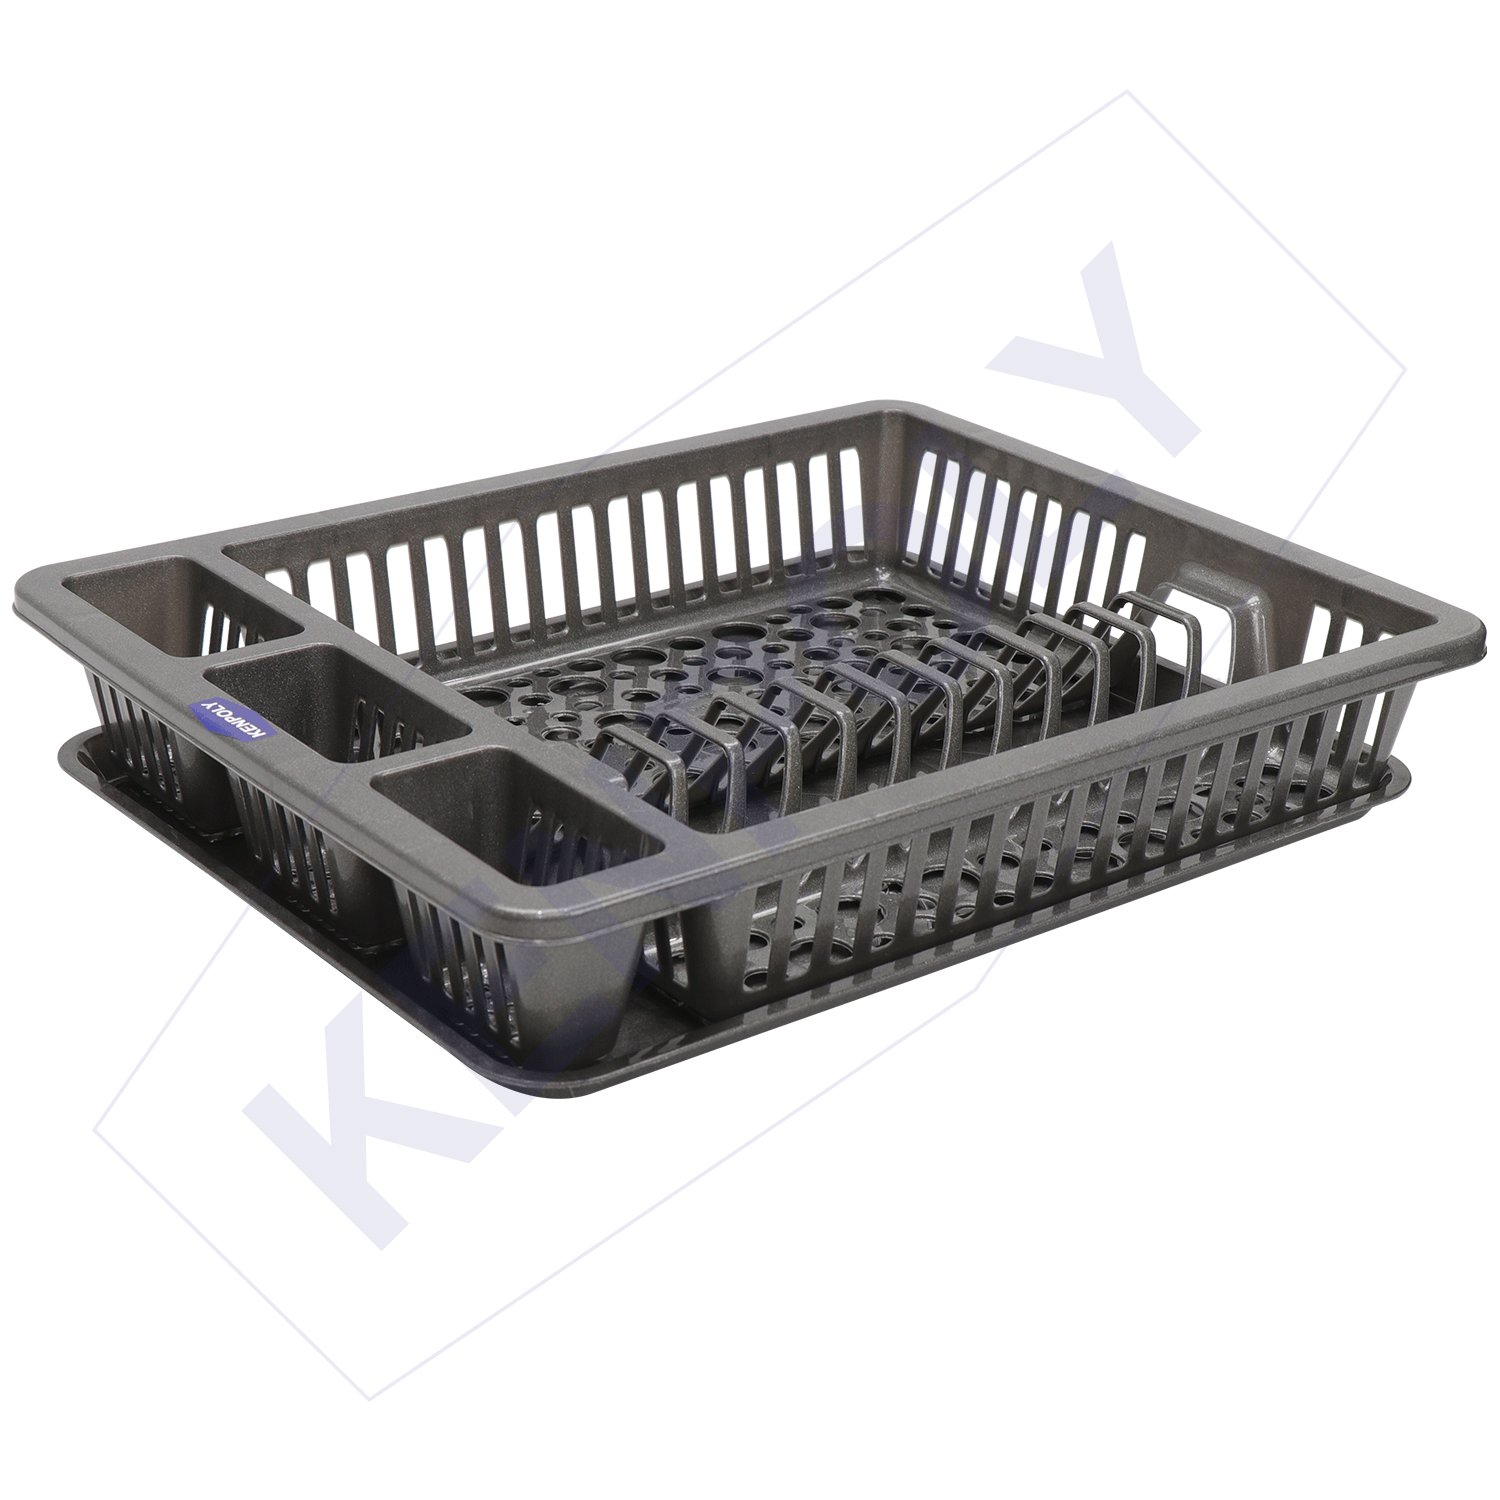 Double Decker Dish Rack No.2  Kenpoly Manufacturers Limited